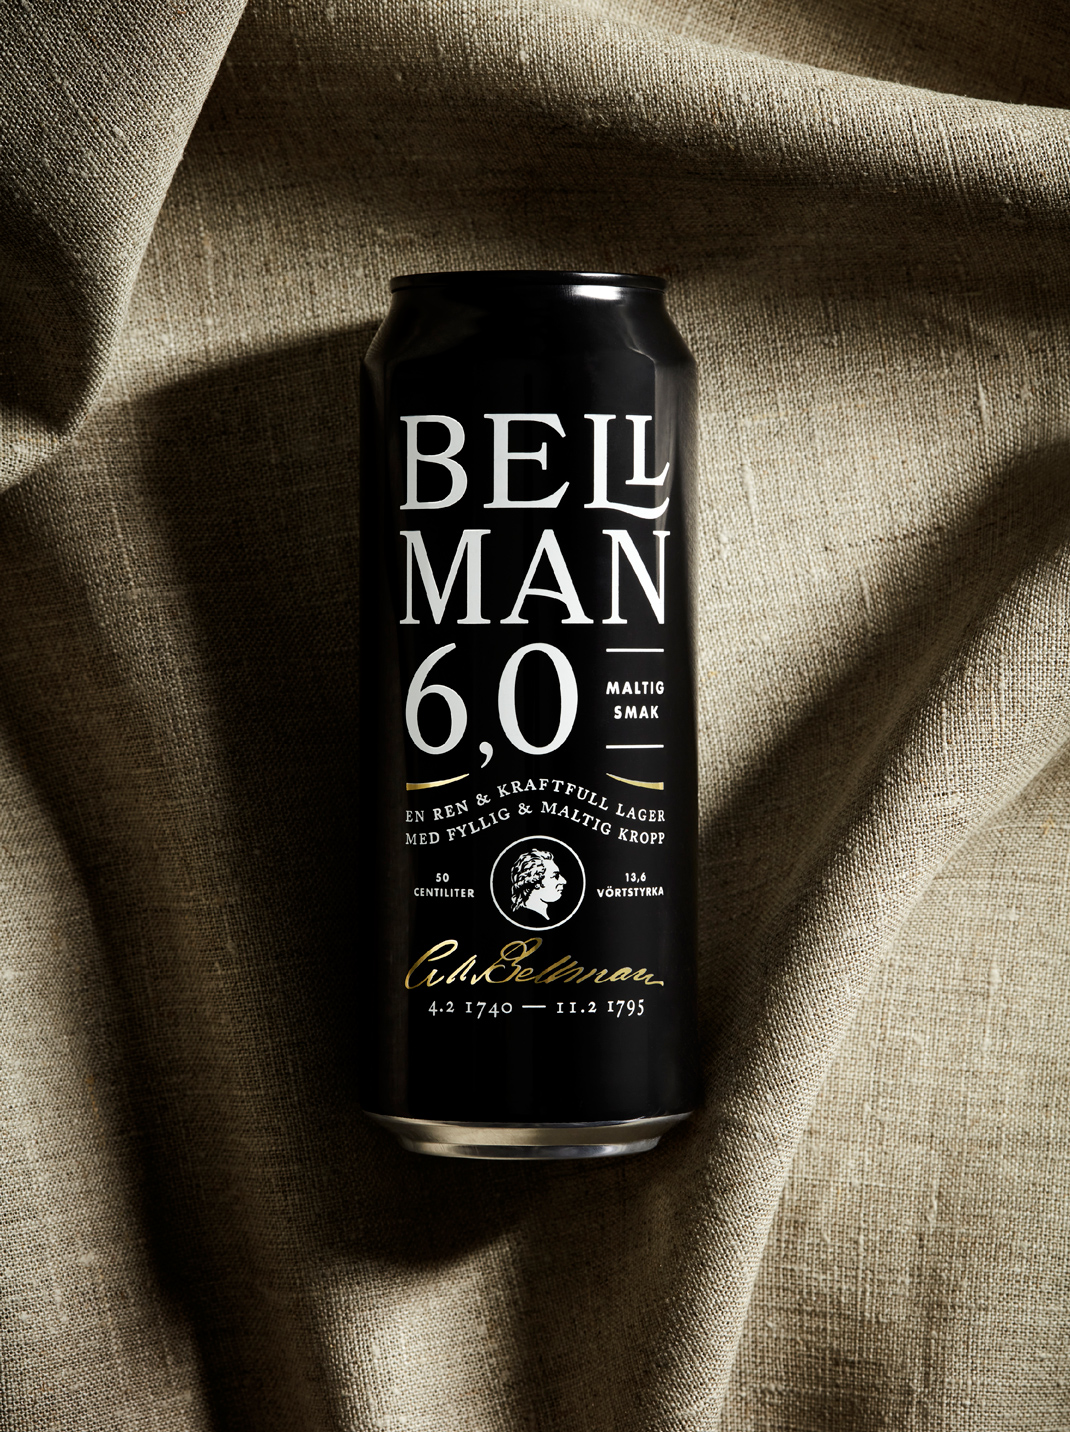 Bellman Highlights Their Character With a Rebrand